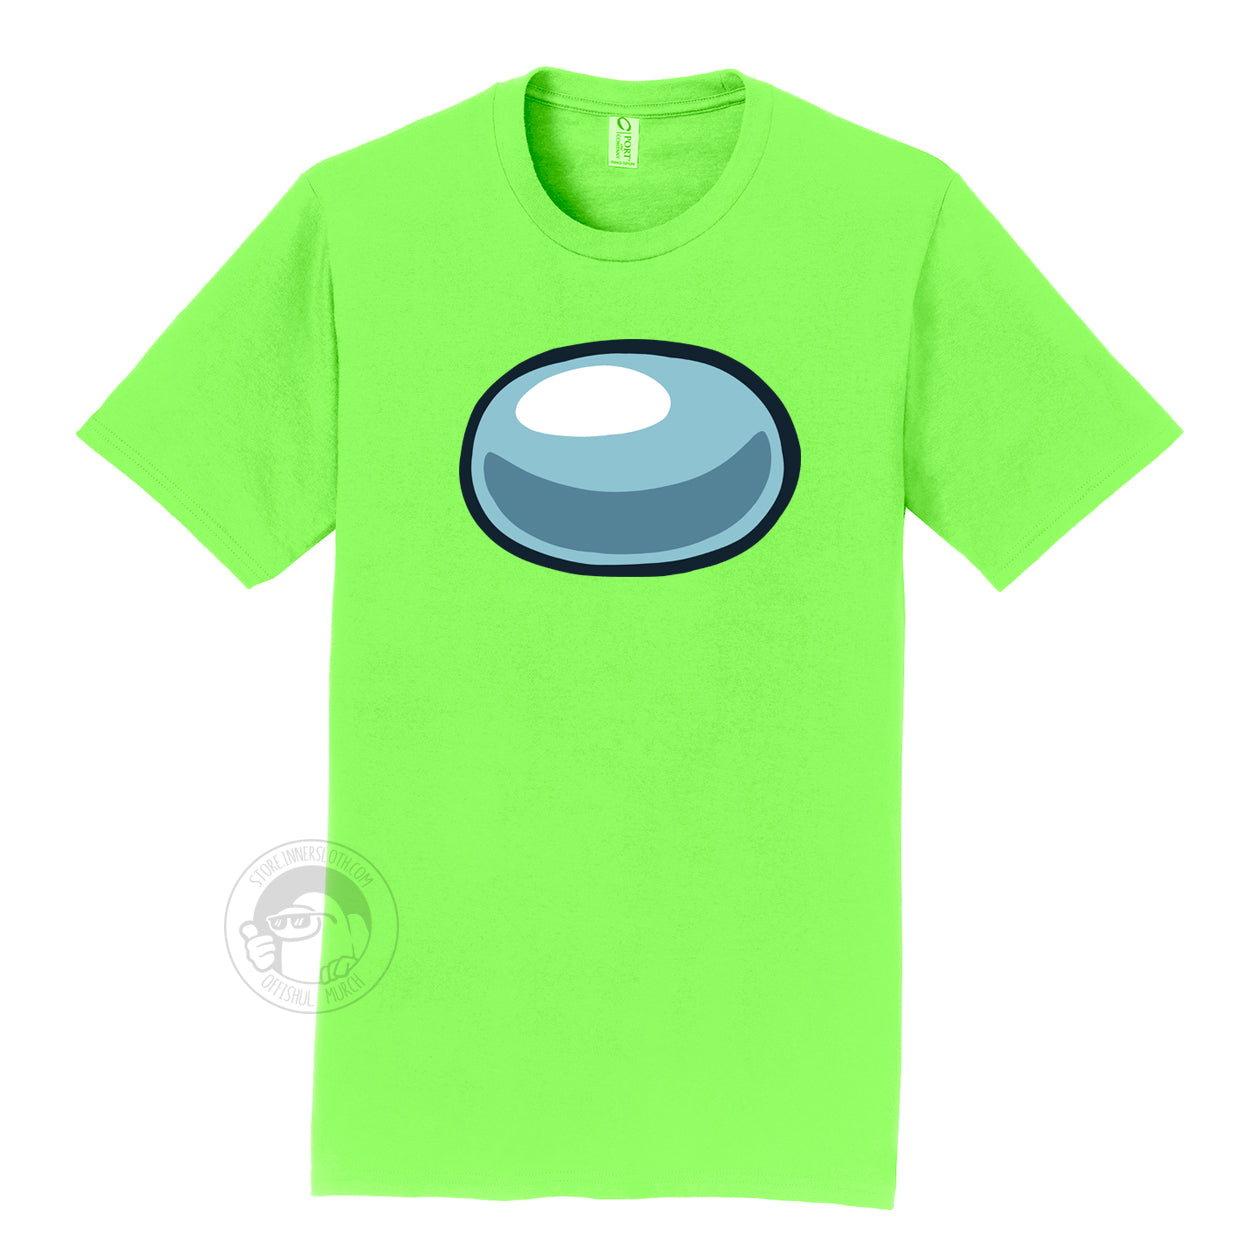 A product photograph of the Among Us: Crewmate Tee in lime green. The shirt depicts the crewmate's visor on the chest of the shirt.